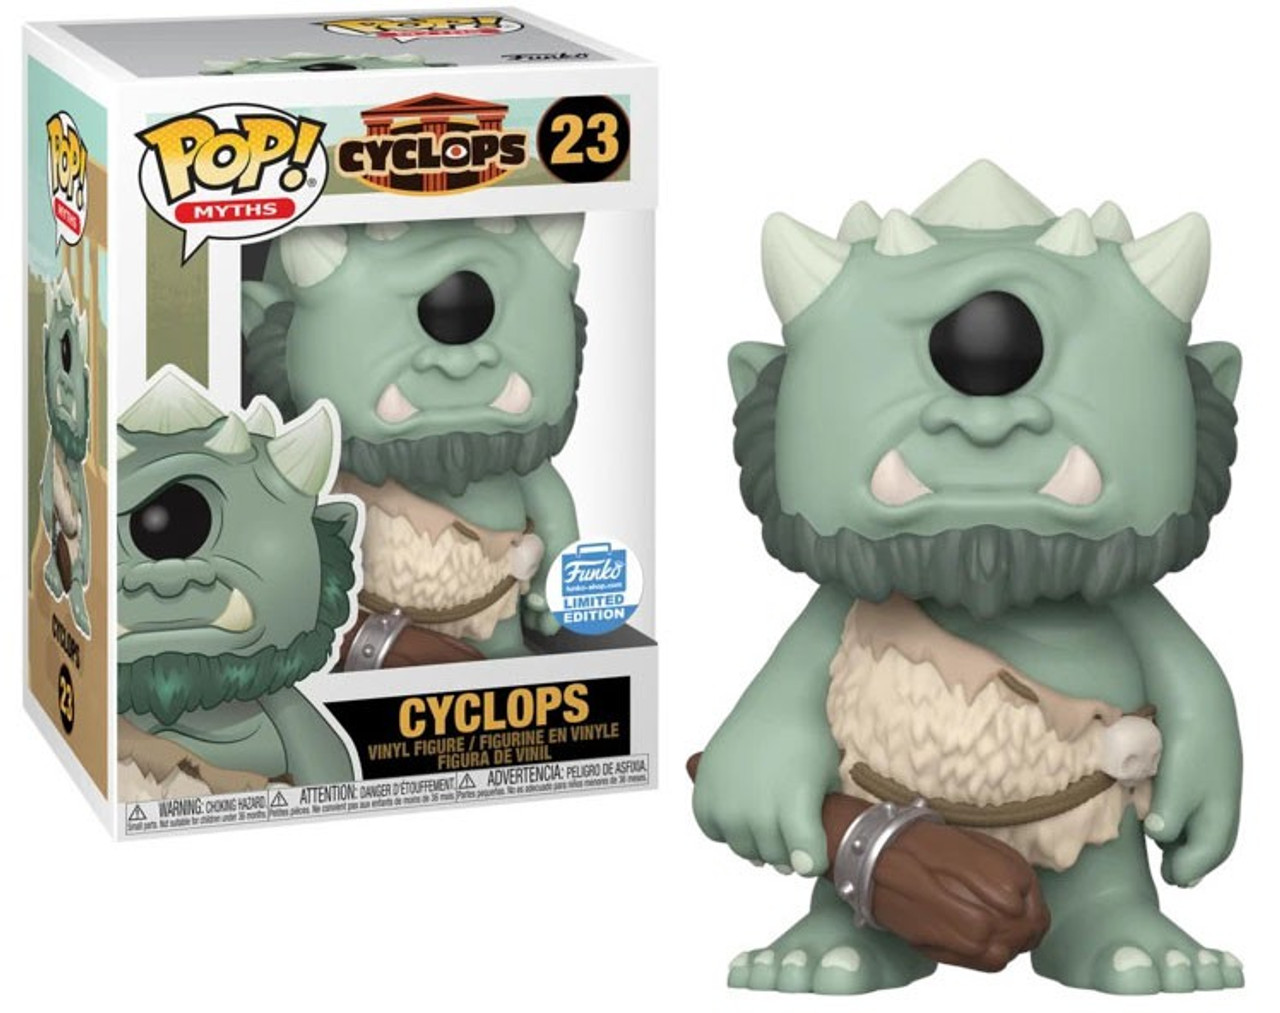 Funko Gnome Pop Myths Cyclops Exclusive Vinyl Figure 23 Toywiz - roblox attack on titan universe 20th expedition